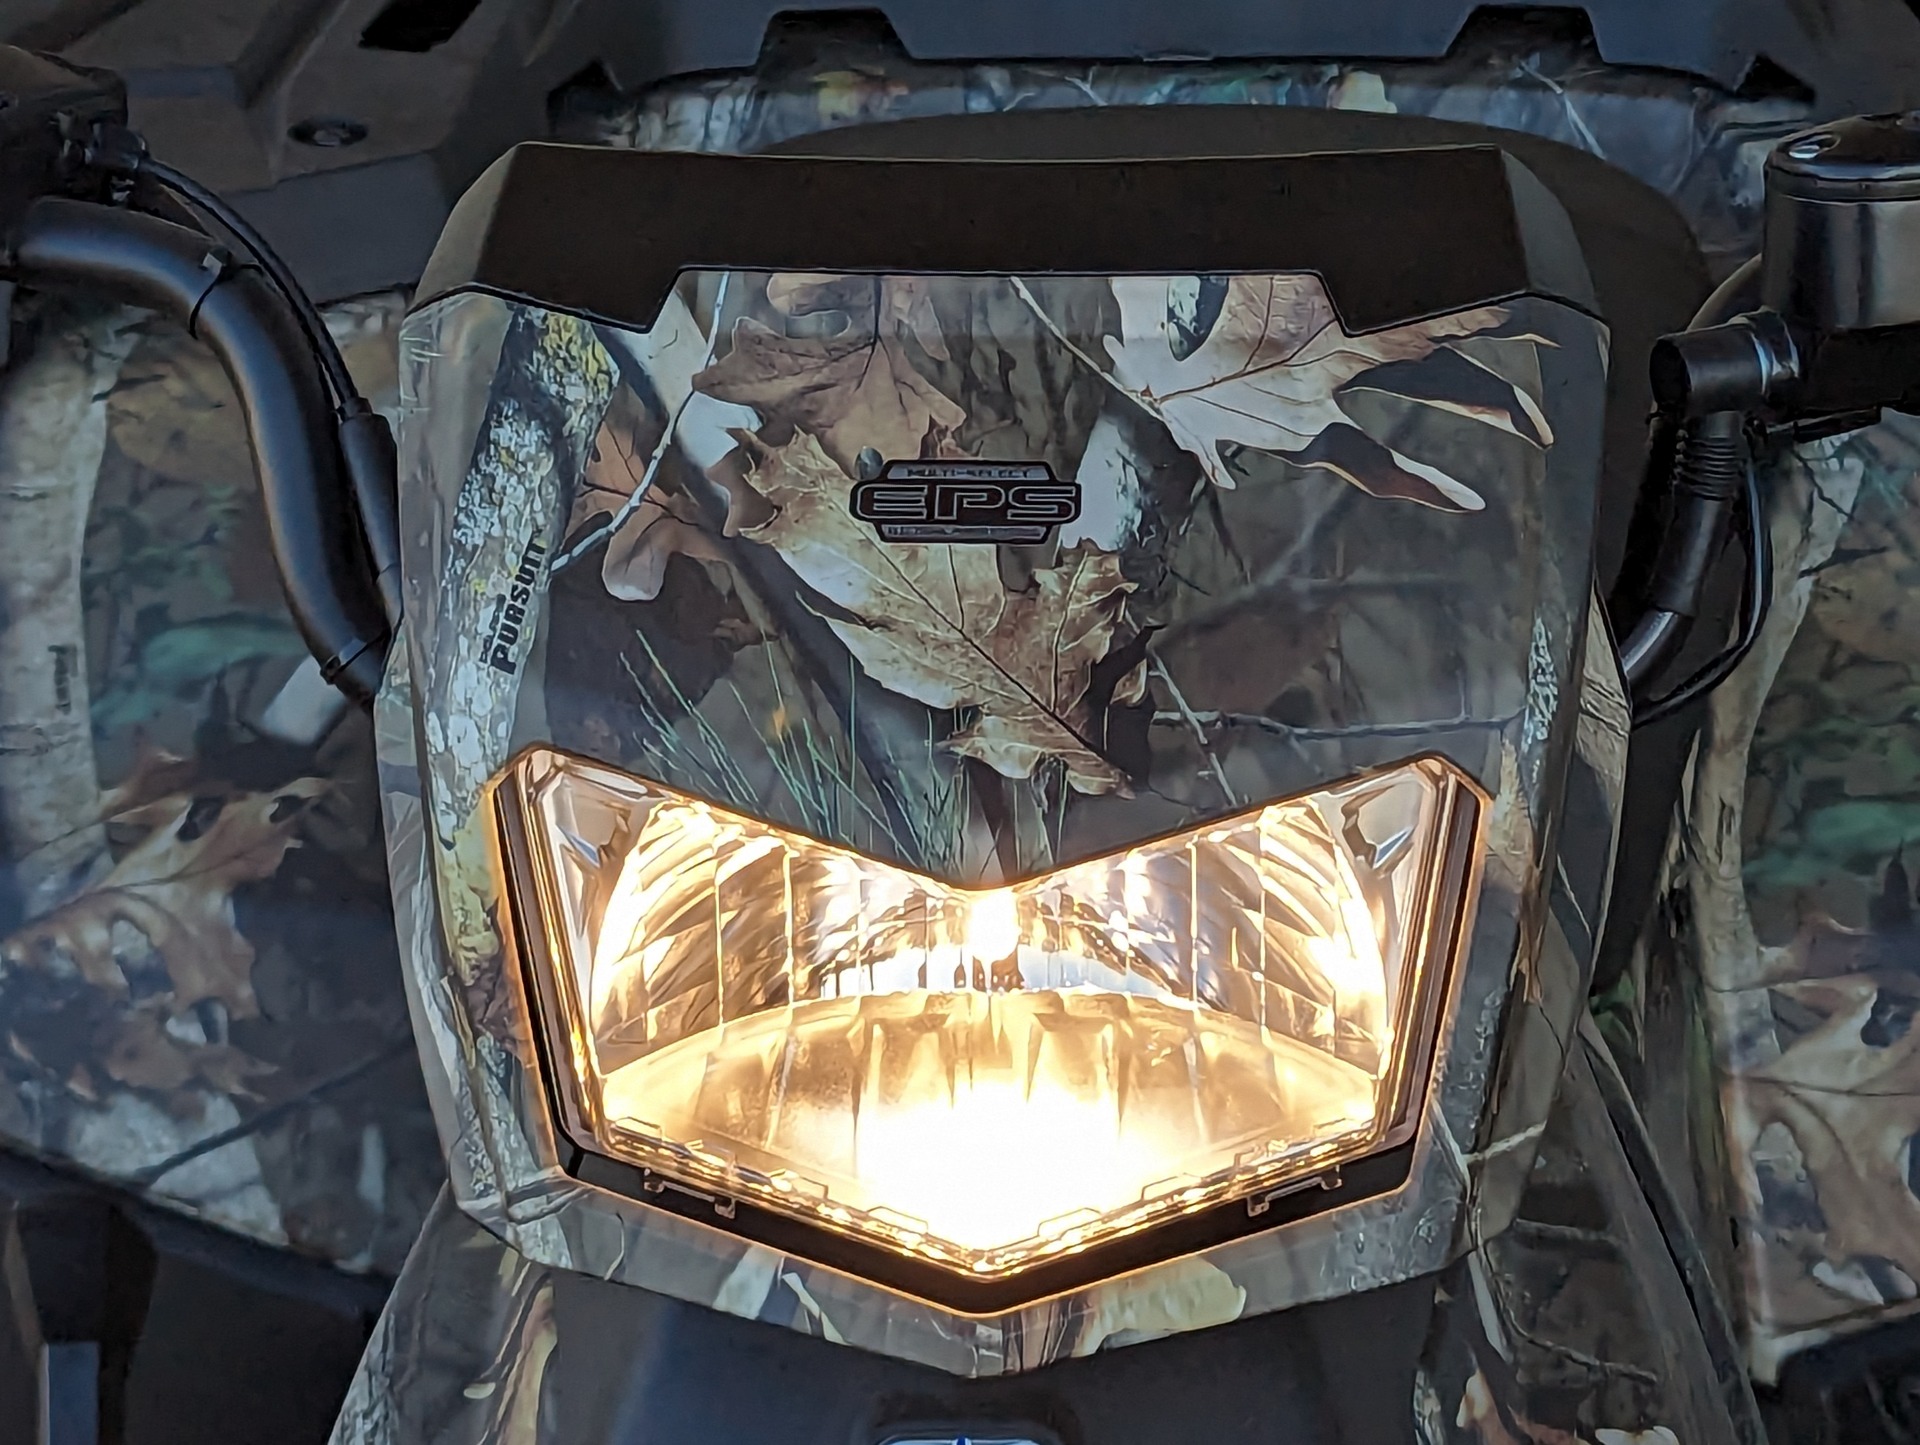 2024 Polaris Sportsman 570 EPS in Winchester, Tennessee - Photo 2